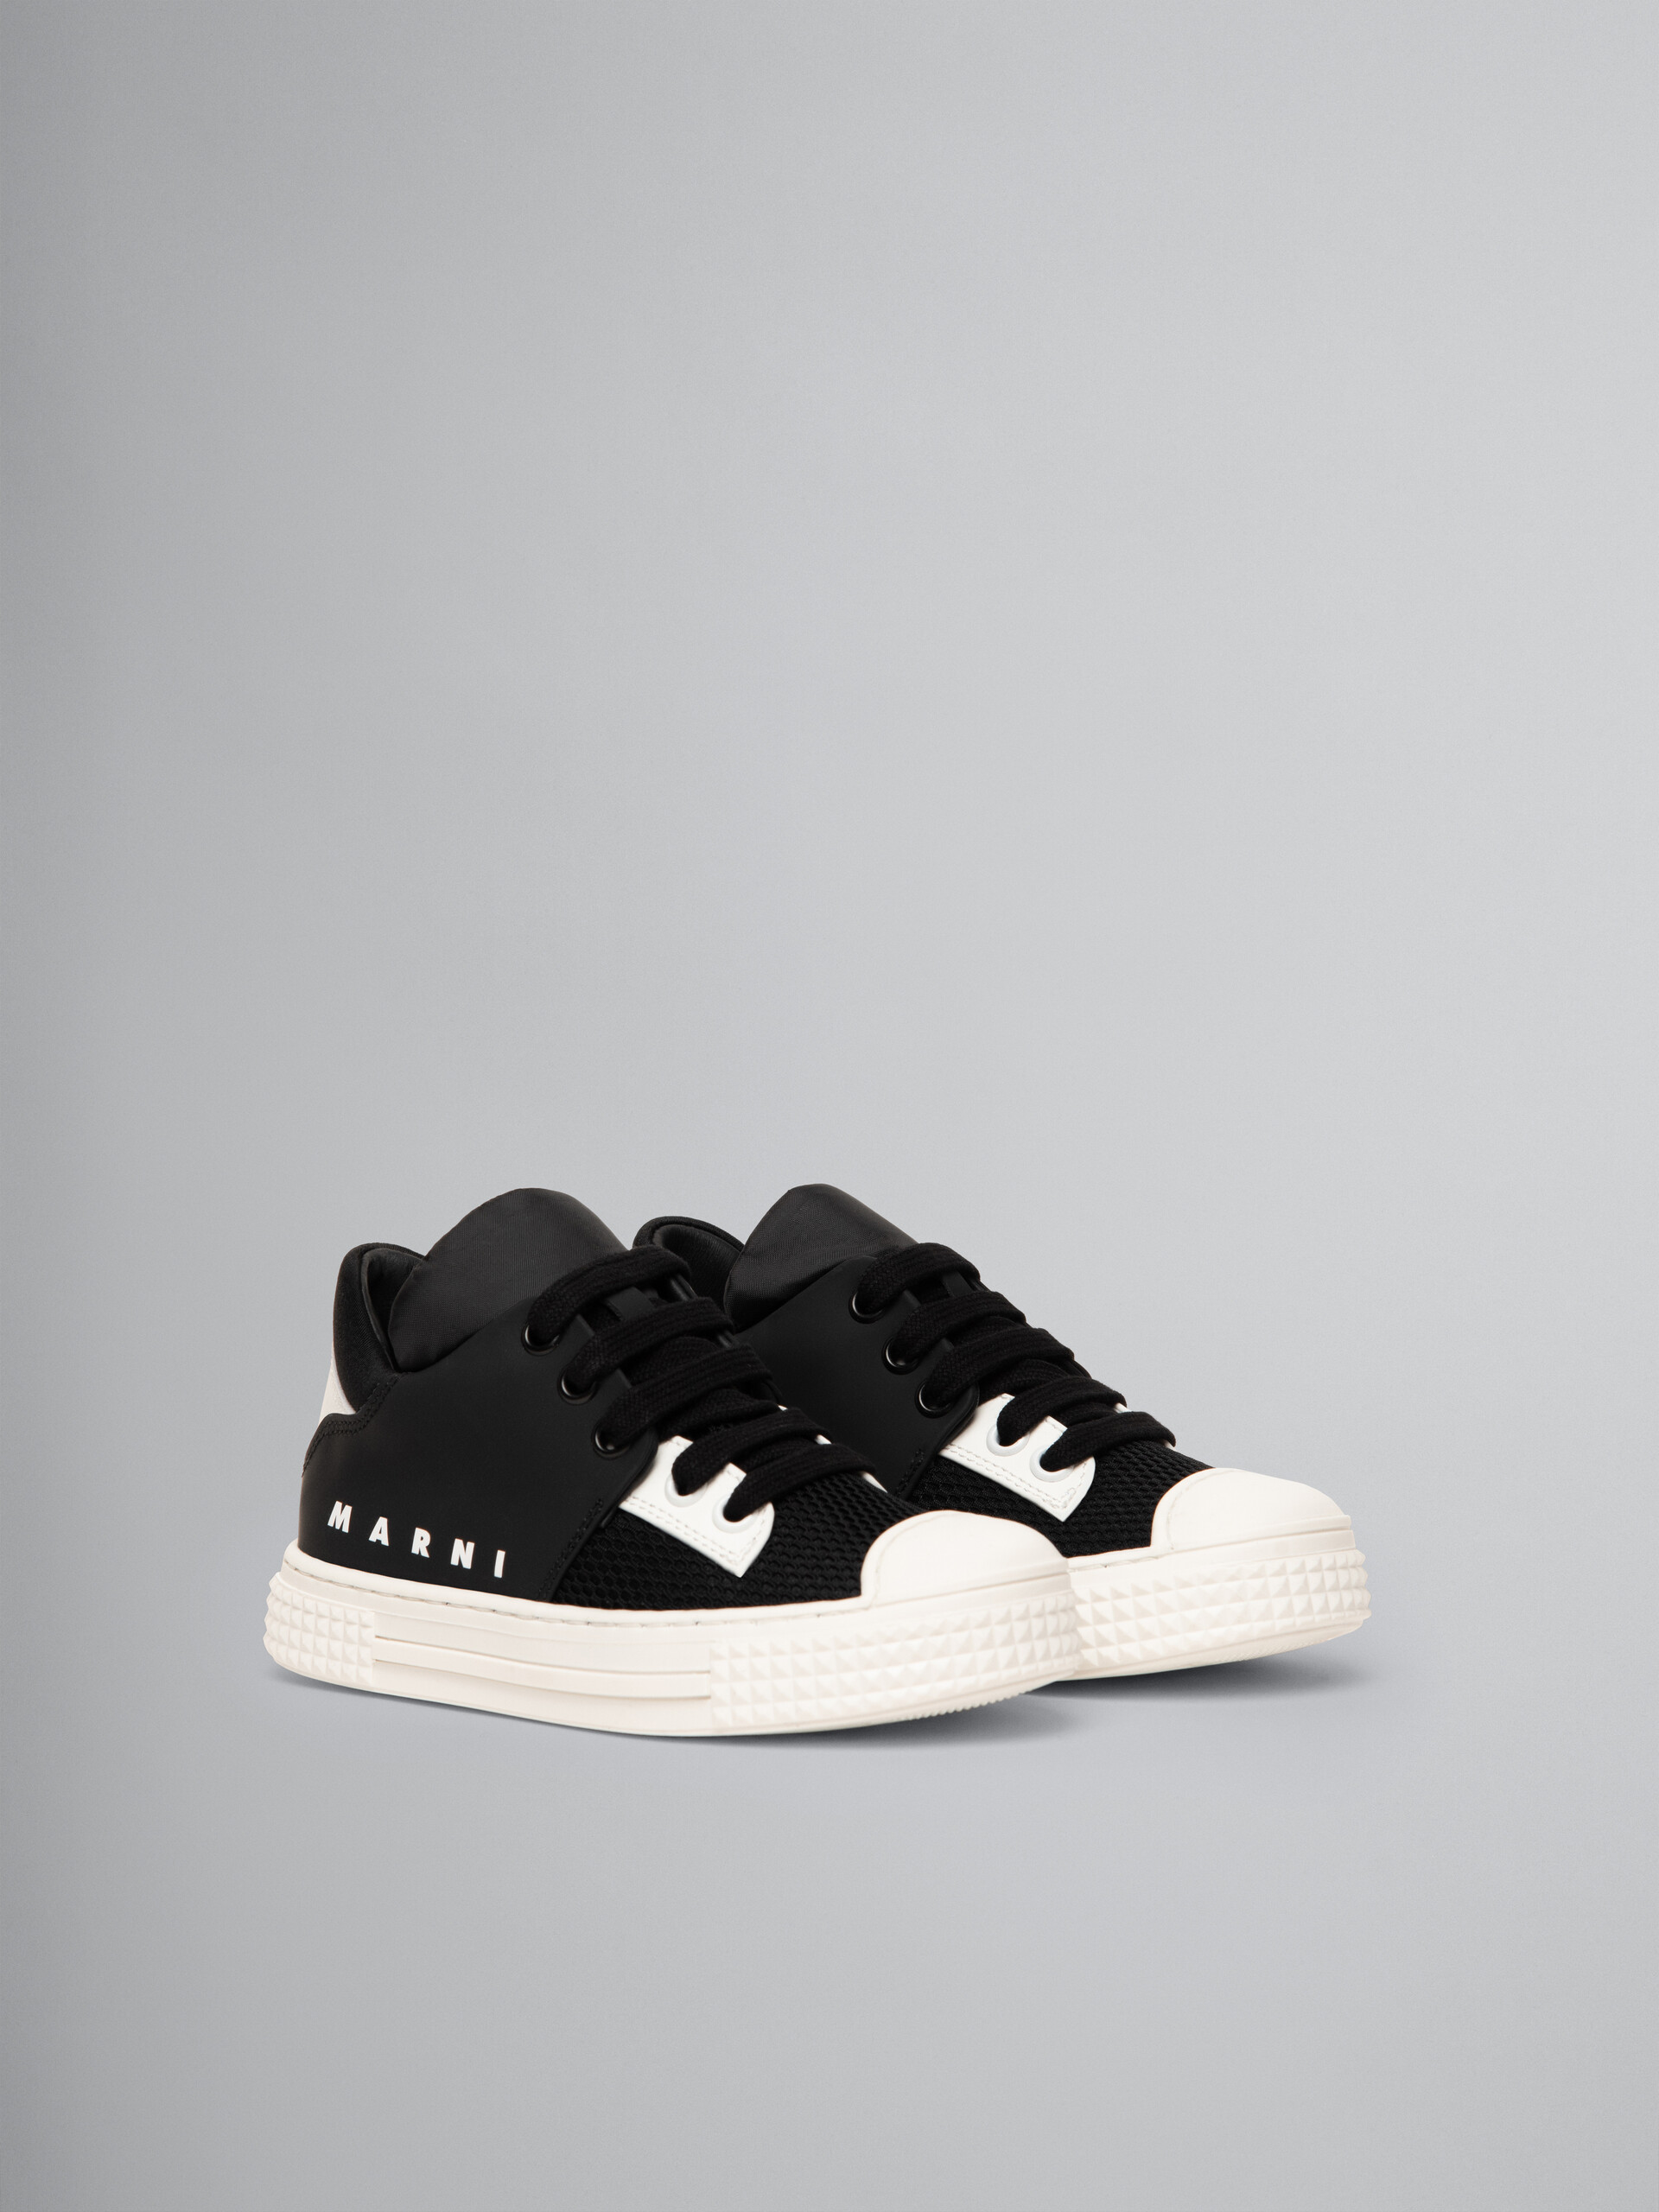 Black leather sneaker with Marni logo - Other accessories - Image 2